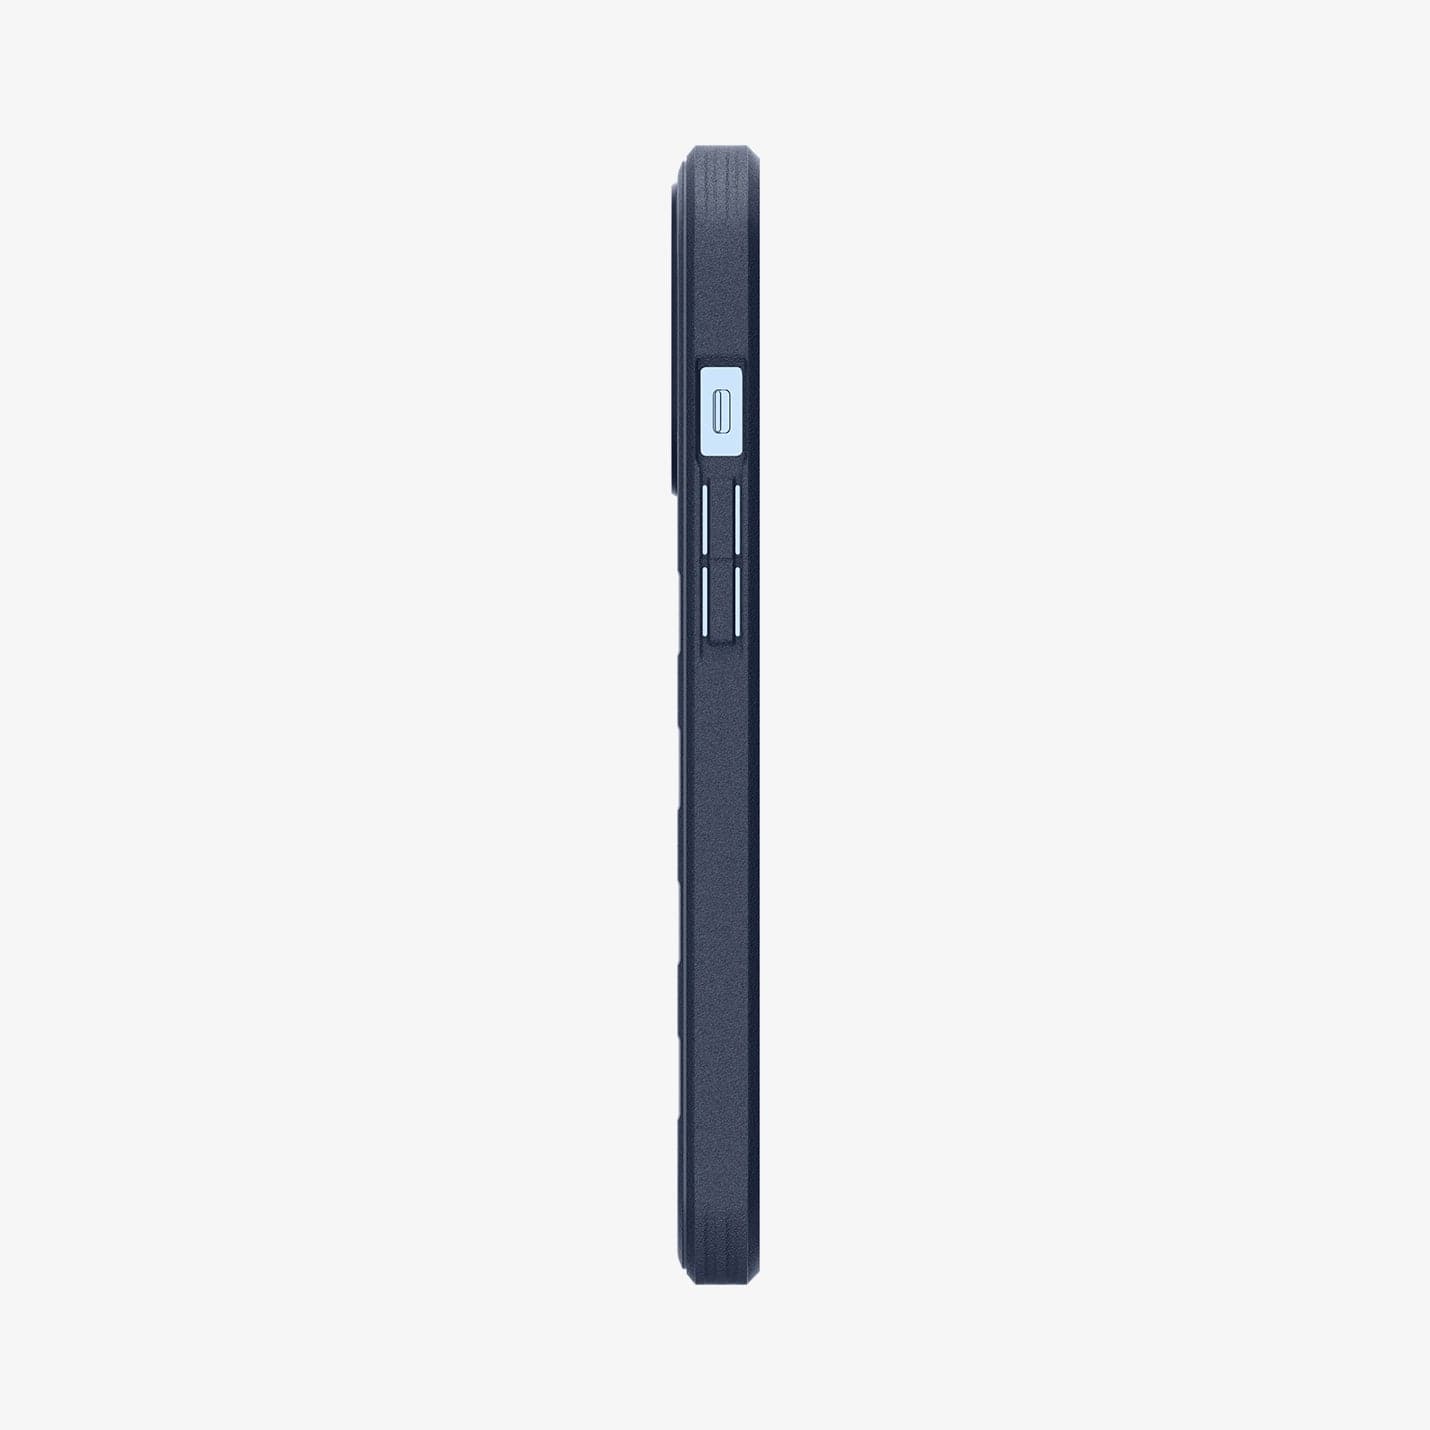 ACS03292 - iPhone 13 Pro Case Geo 360 in navy blue showing the side with volume controls